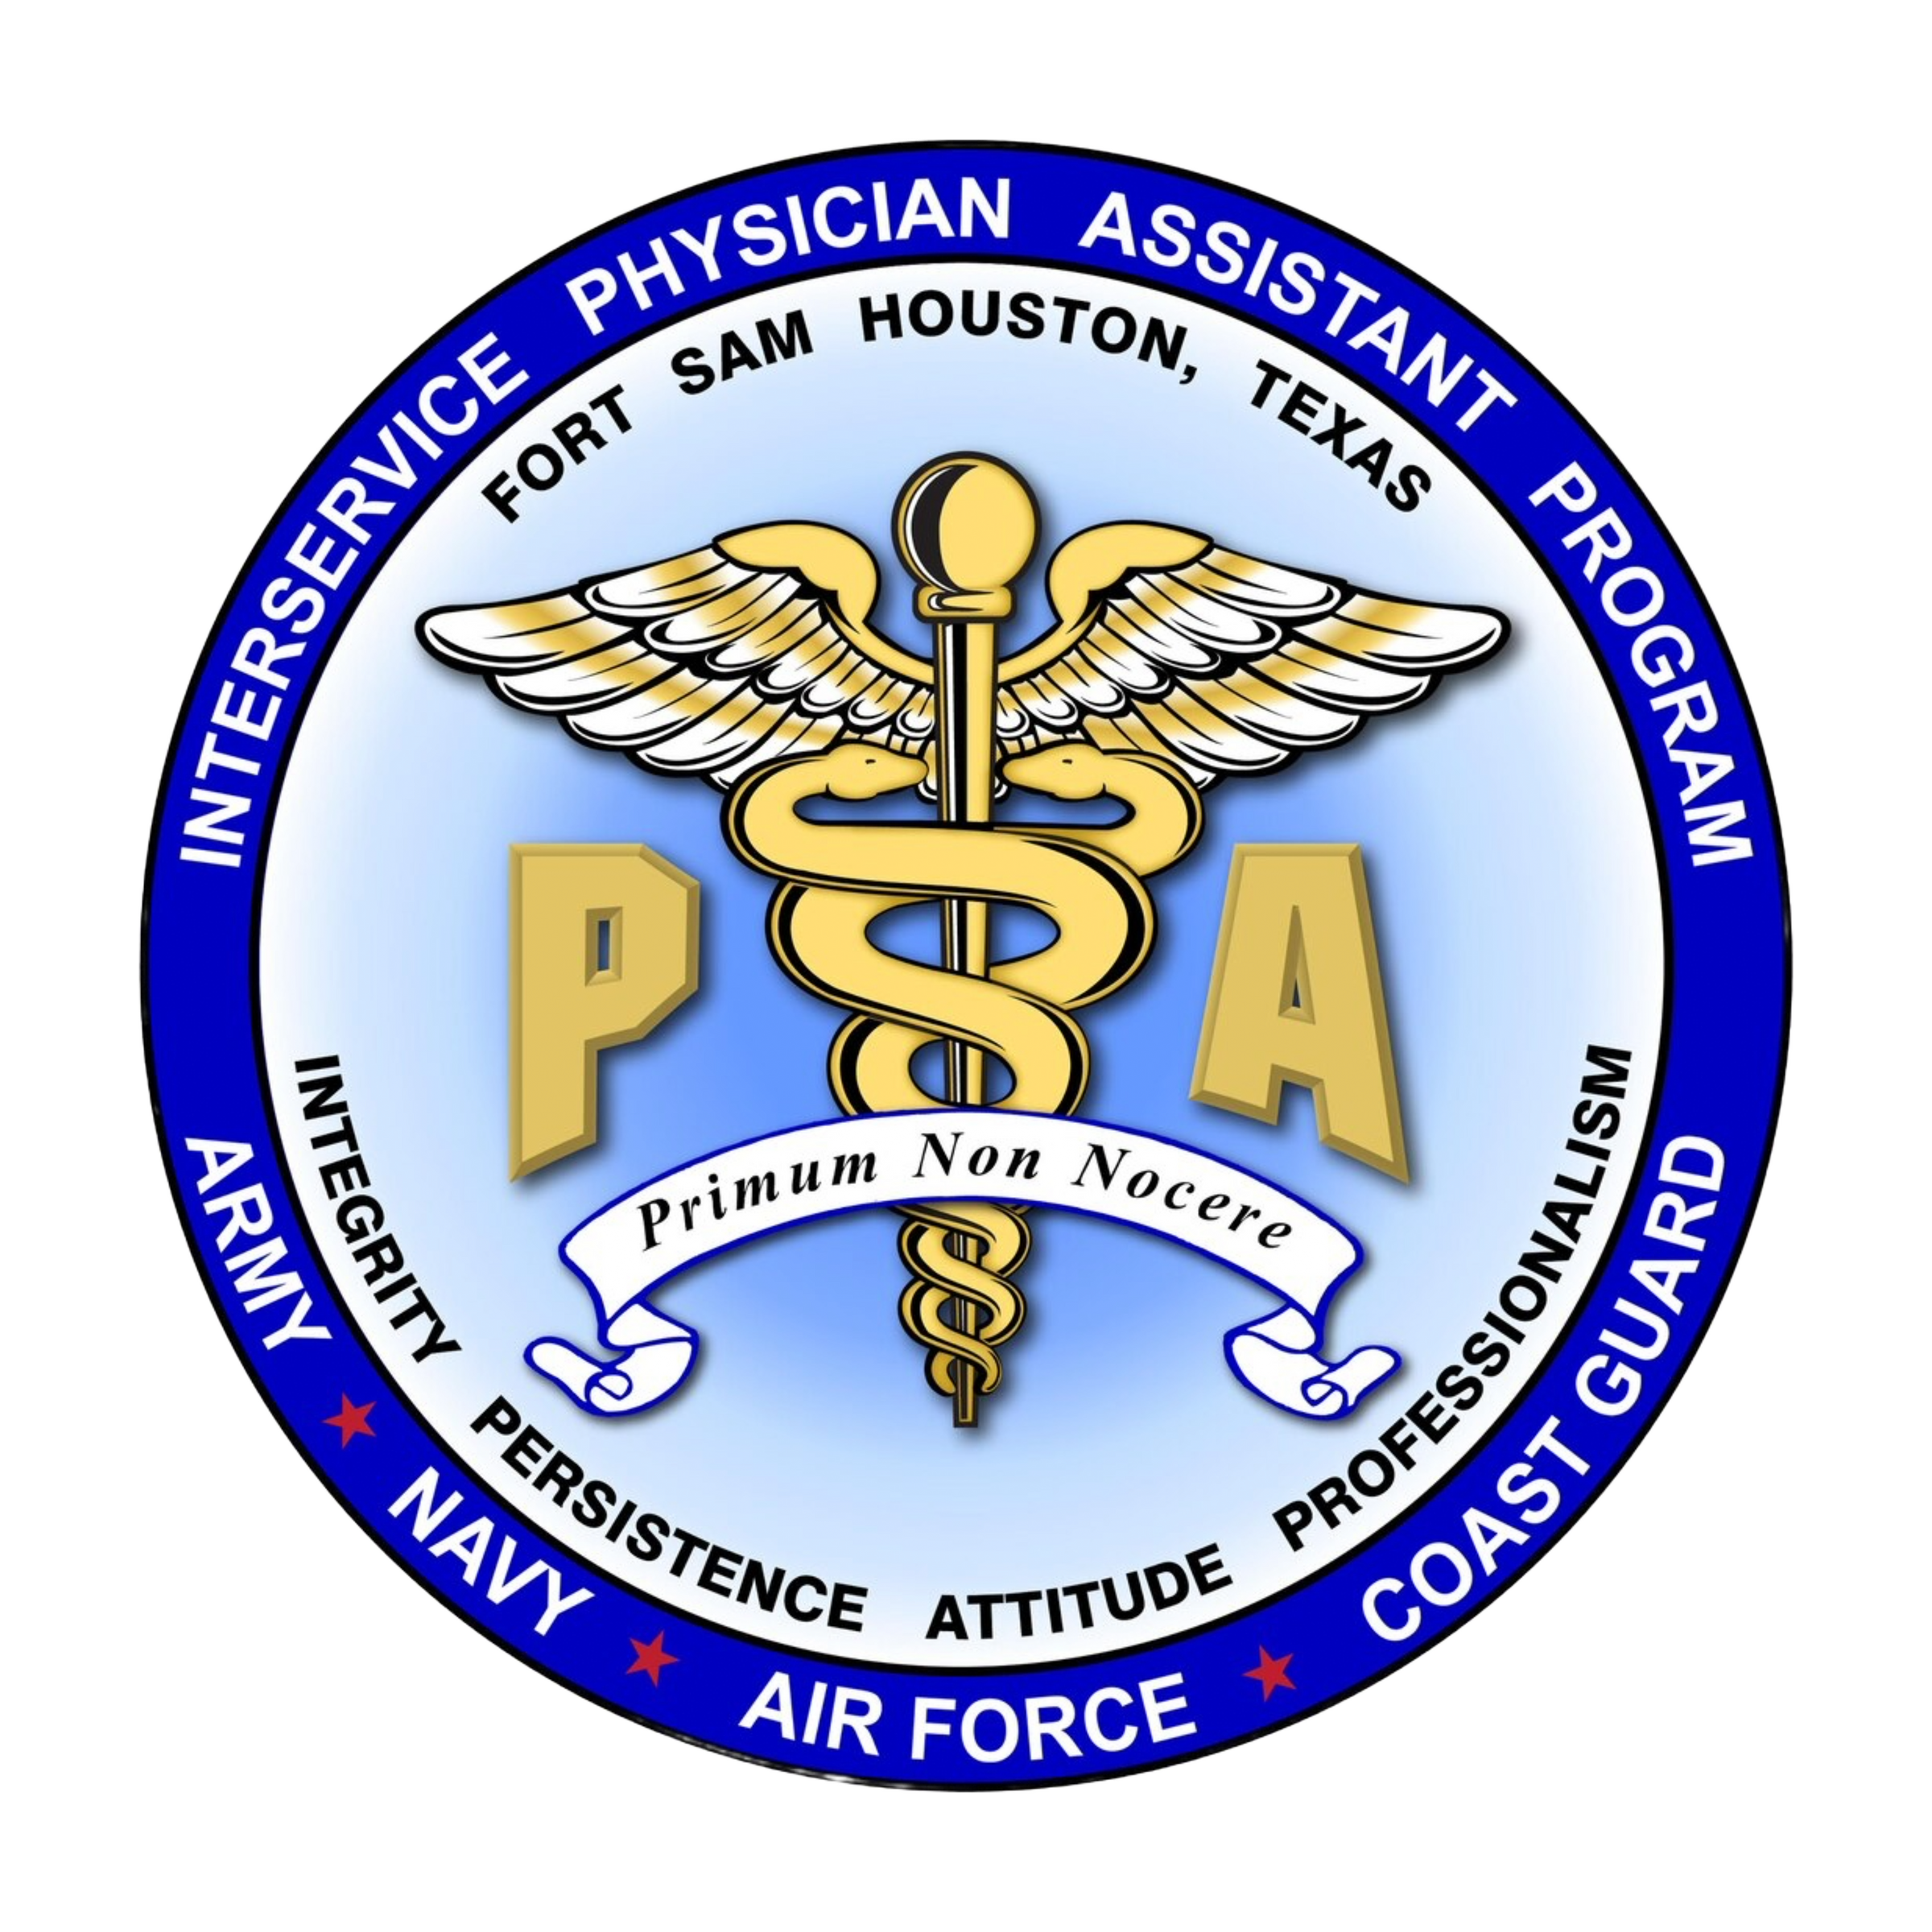 Interservice Physician Assistant Program